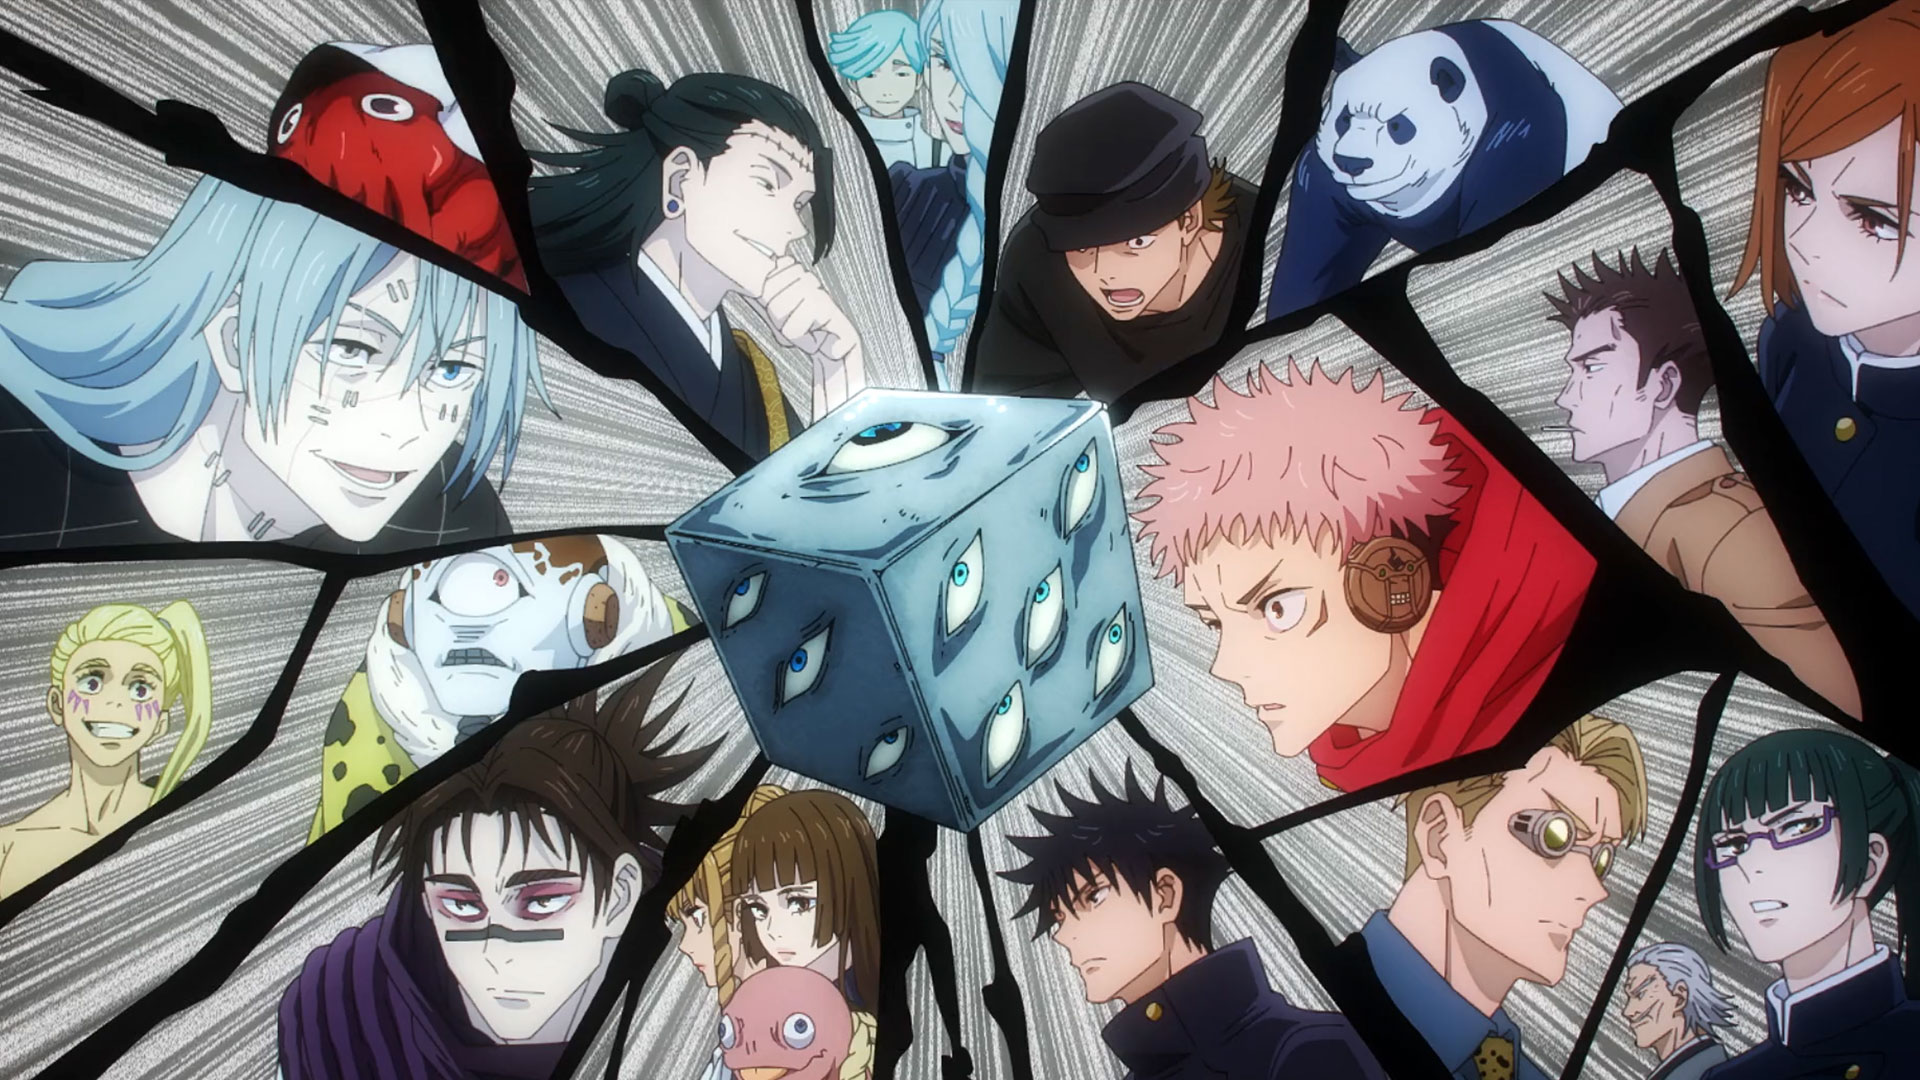 Jujutsu Kaisen Exciting Story Continues